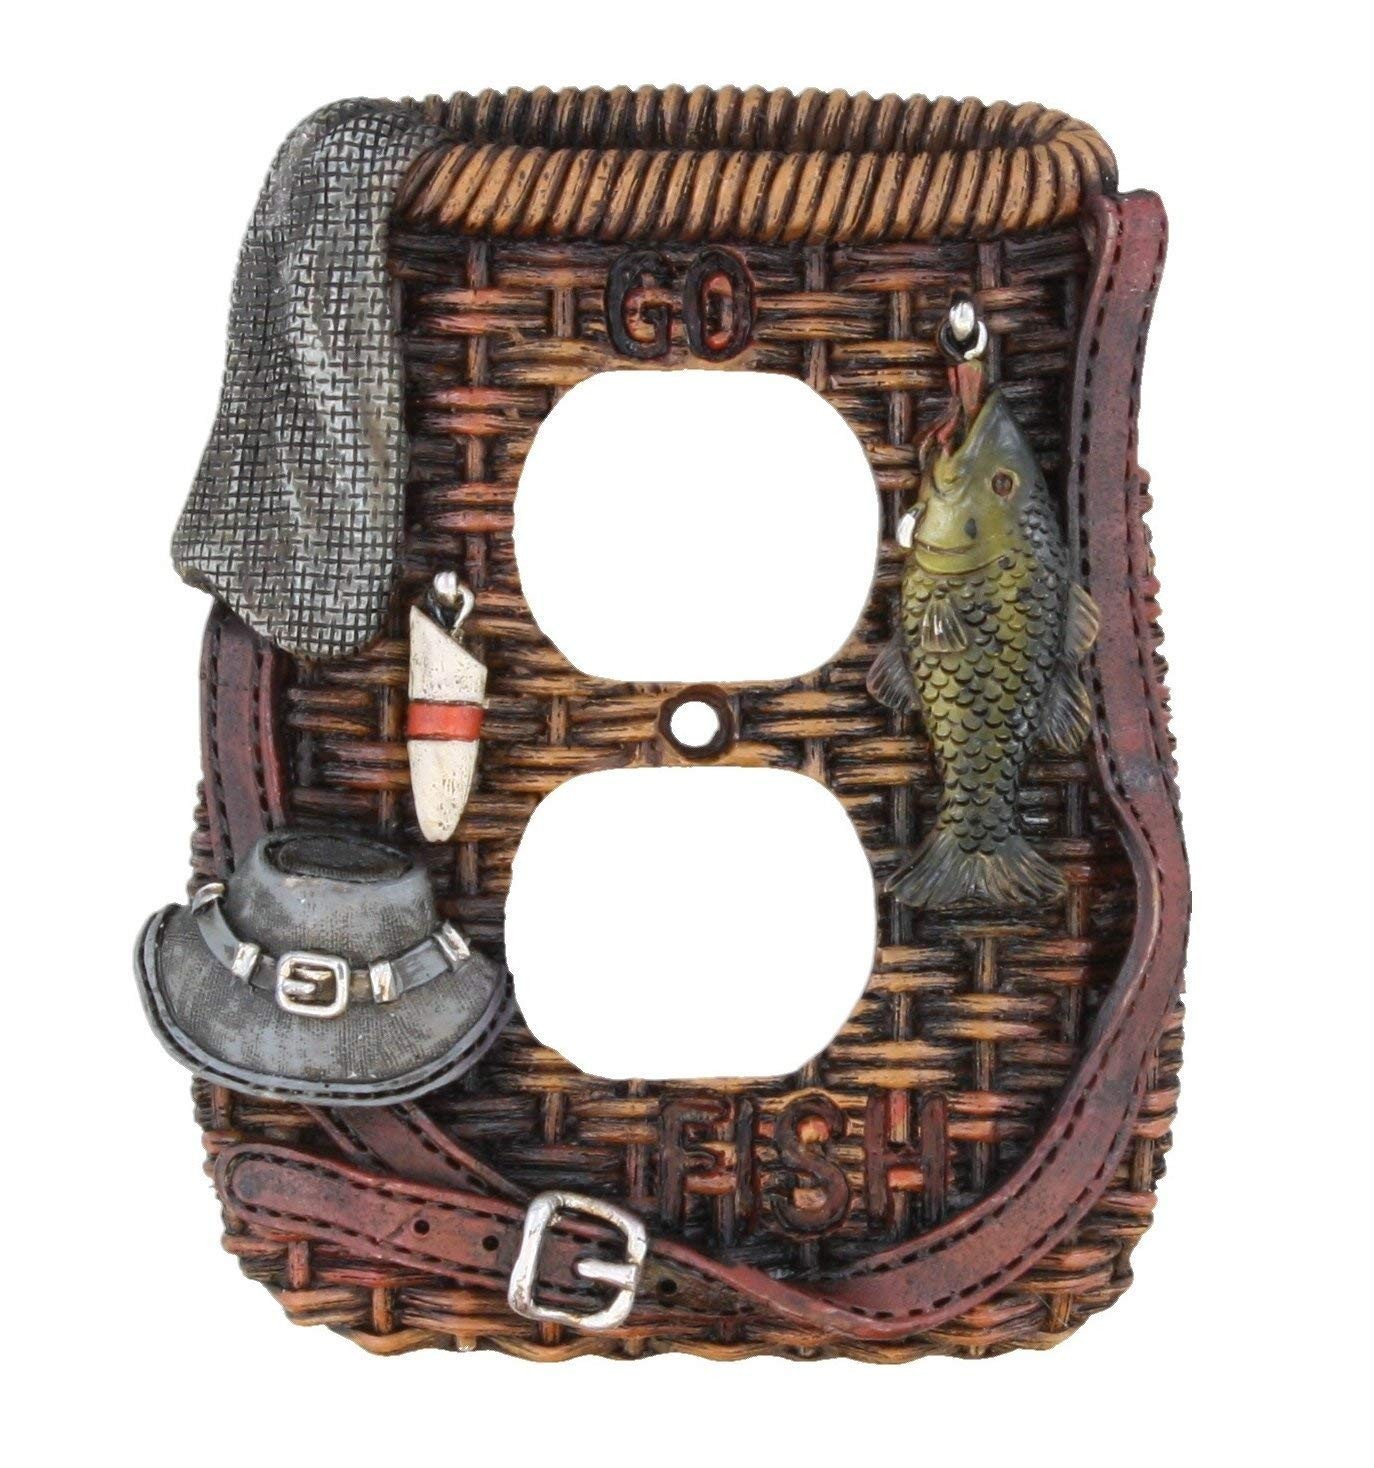 Rather Be Fishing Outlet Switch Plate